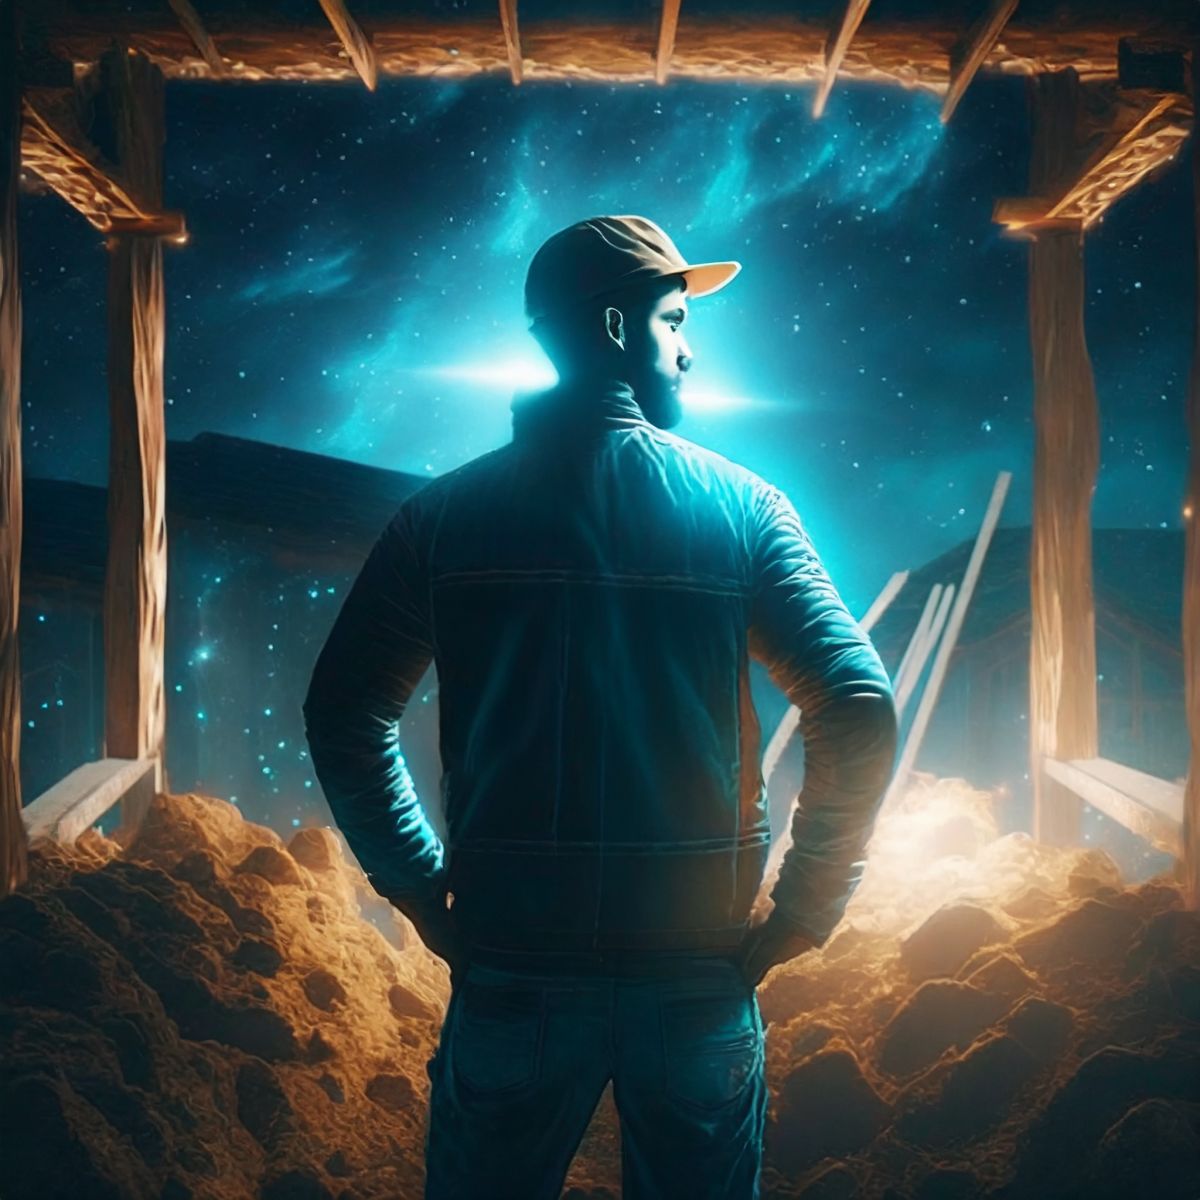 Harrison Wilde, construction contractor and friend of Josh Bach. Image created by Adobe Firefly.